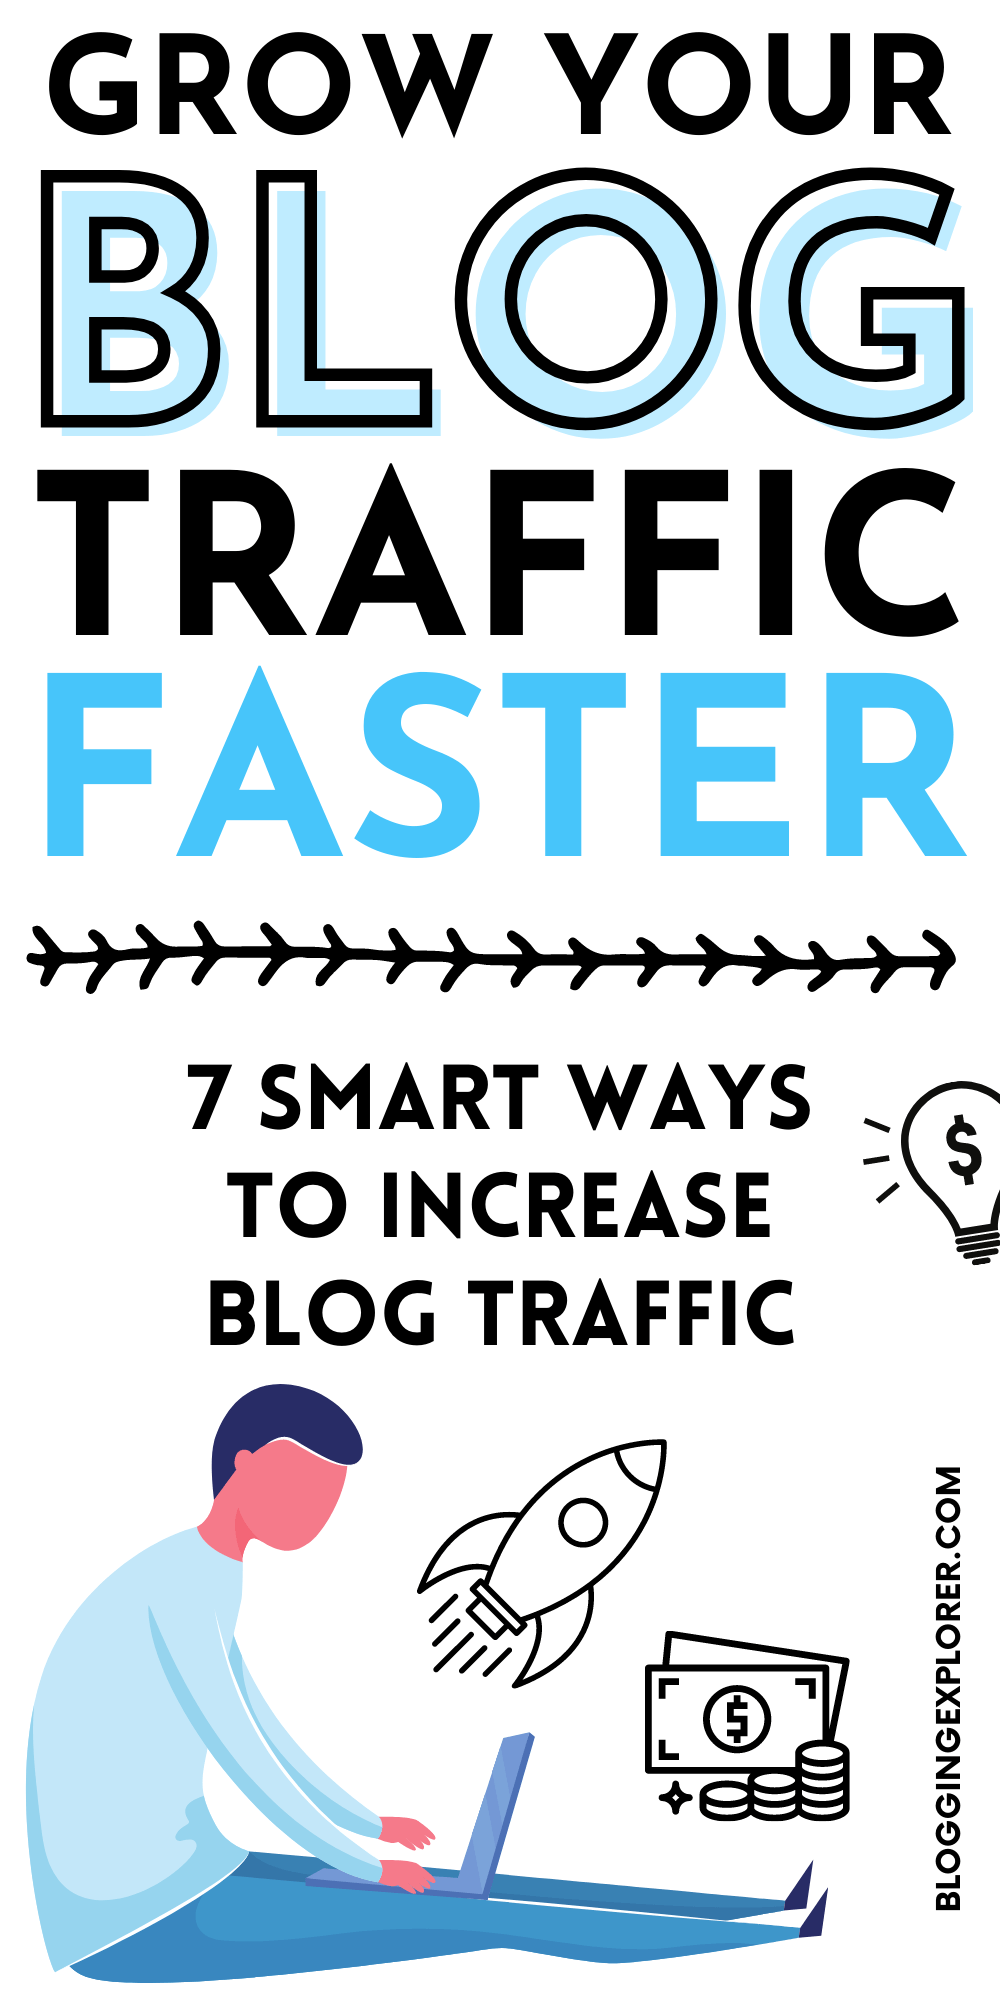 Grow your blog traffic faster - Smart ways to increase blog traffic